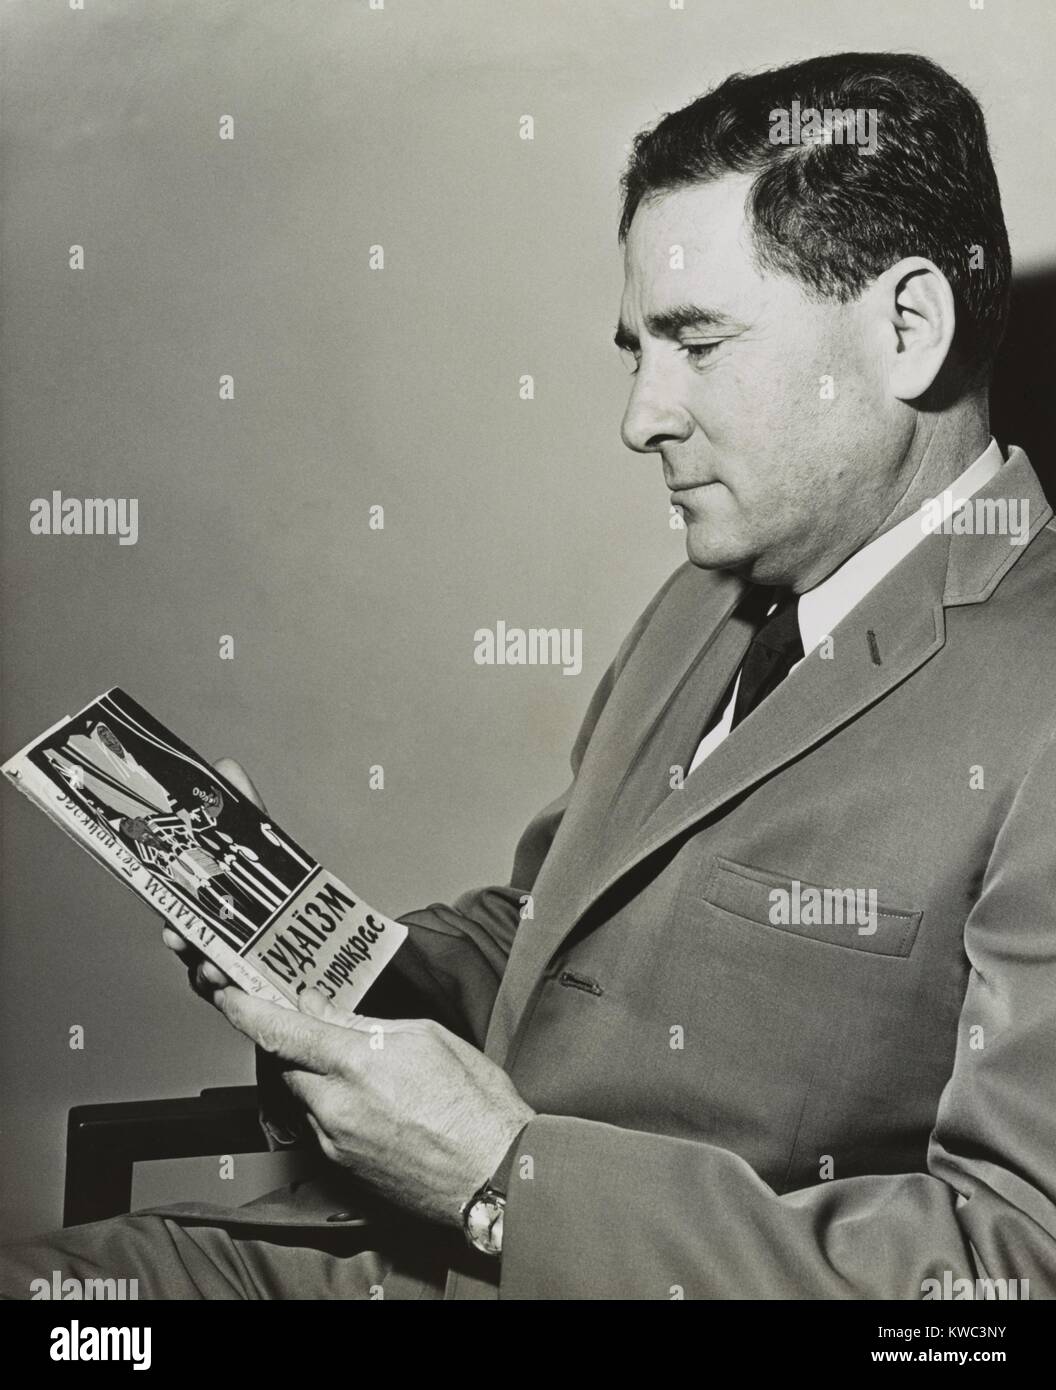 Morris B. Abram, President American Jewish Committee, holding Russian anti-Semitic book. Feb. 28, 1964. His Humanitarian work included civil rights activism for African American and Jewish causes, and the UN Human Rights Commission. (BSLOC 2015 14 156) Stock Photo